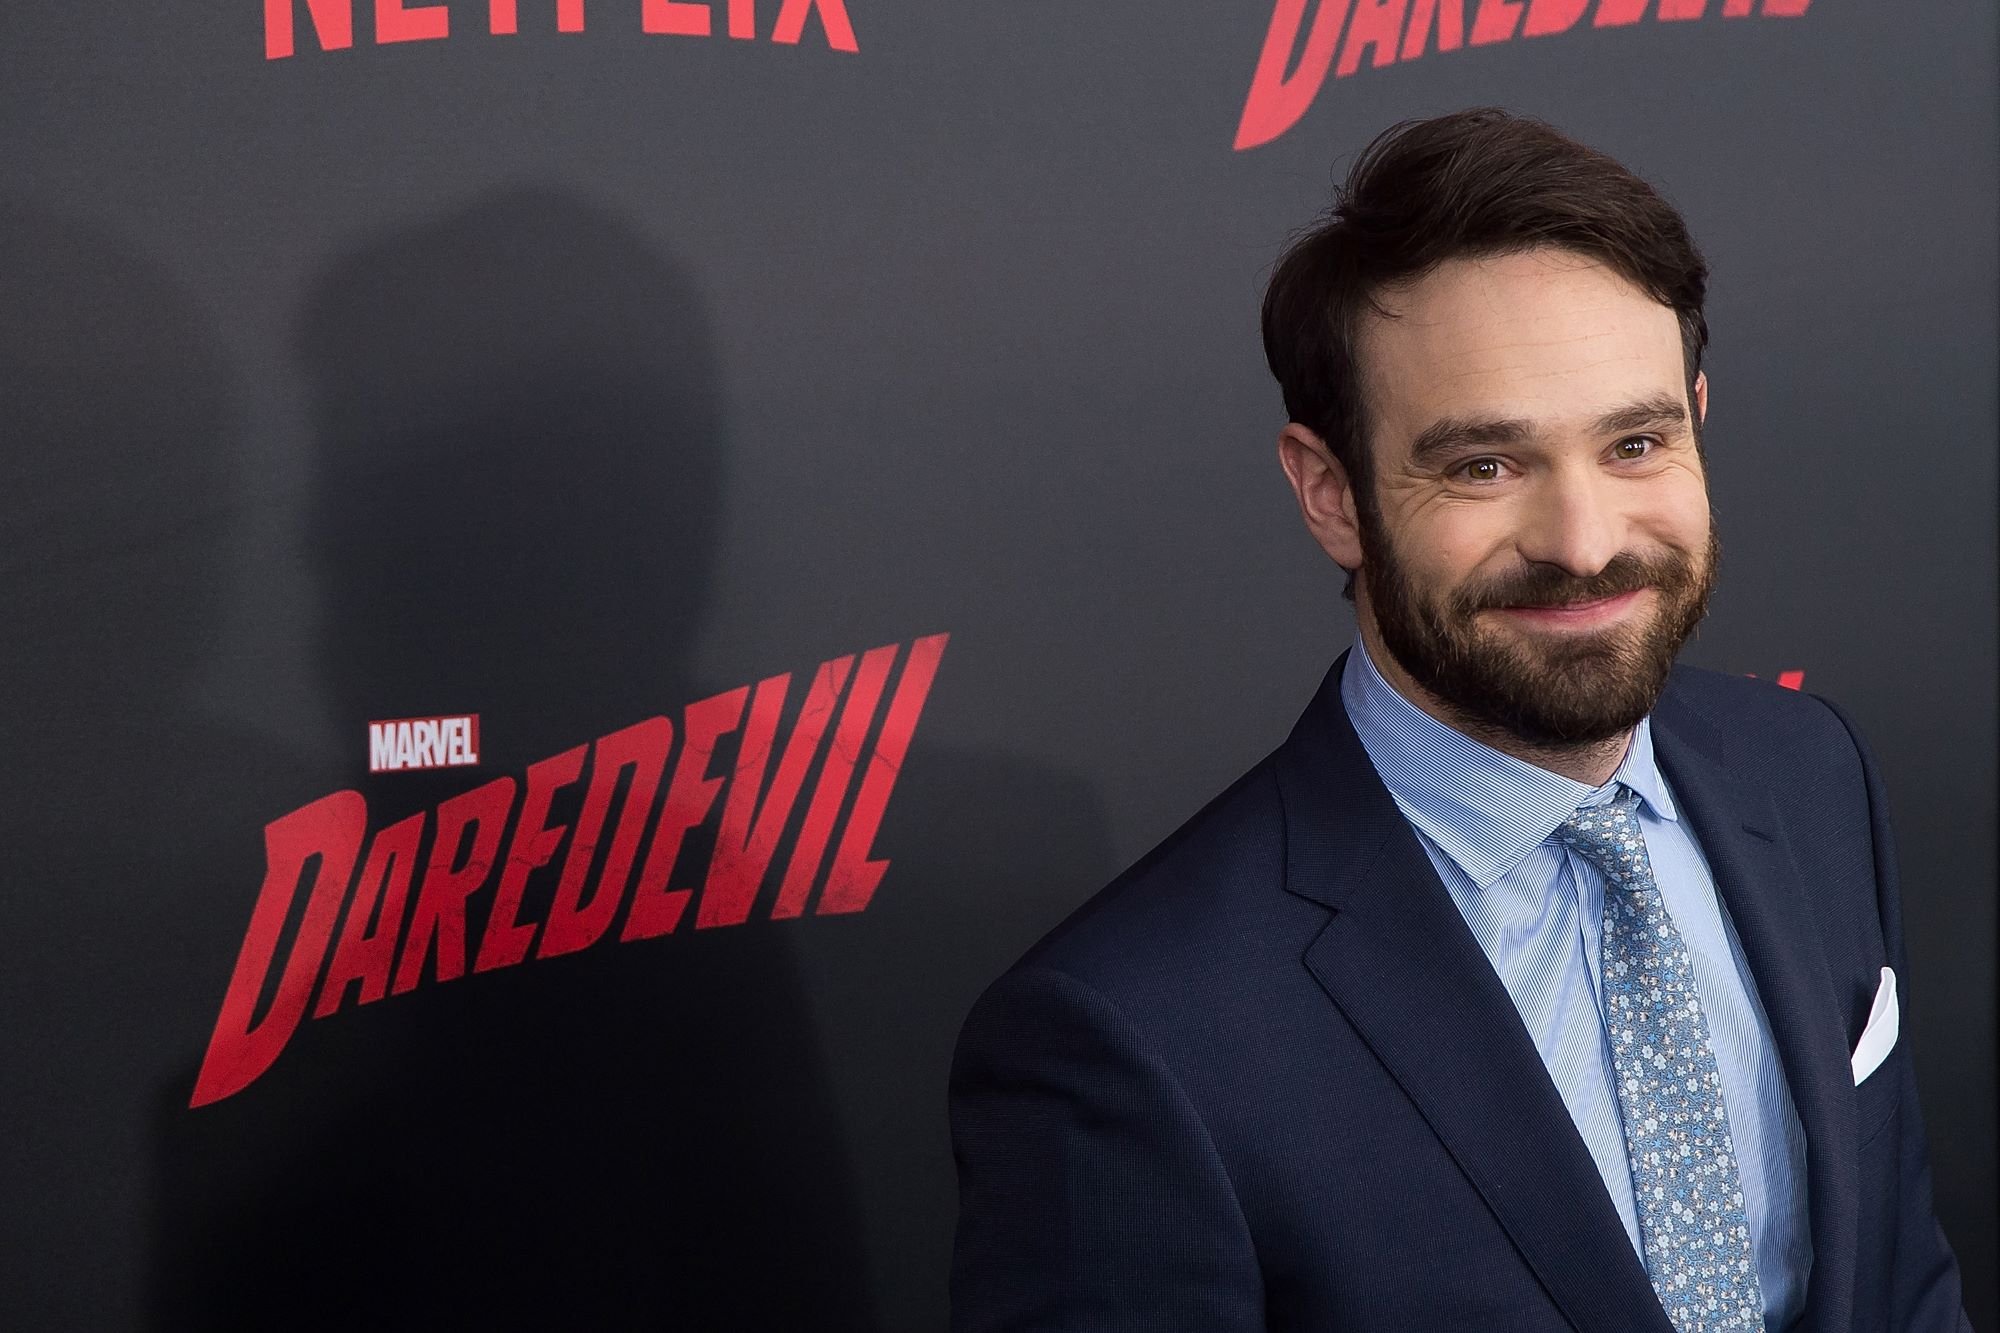 MCU's 'Daredevil' star Charlie Cox wears a dark blue suit over a light blue button-up shirt and blue tie.